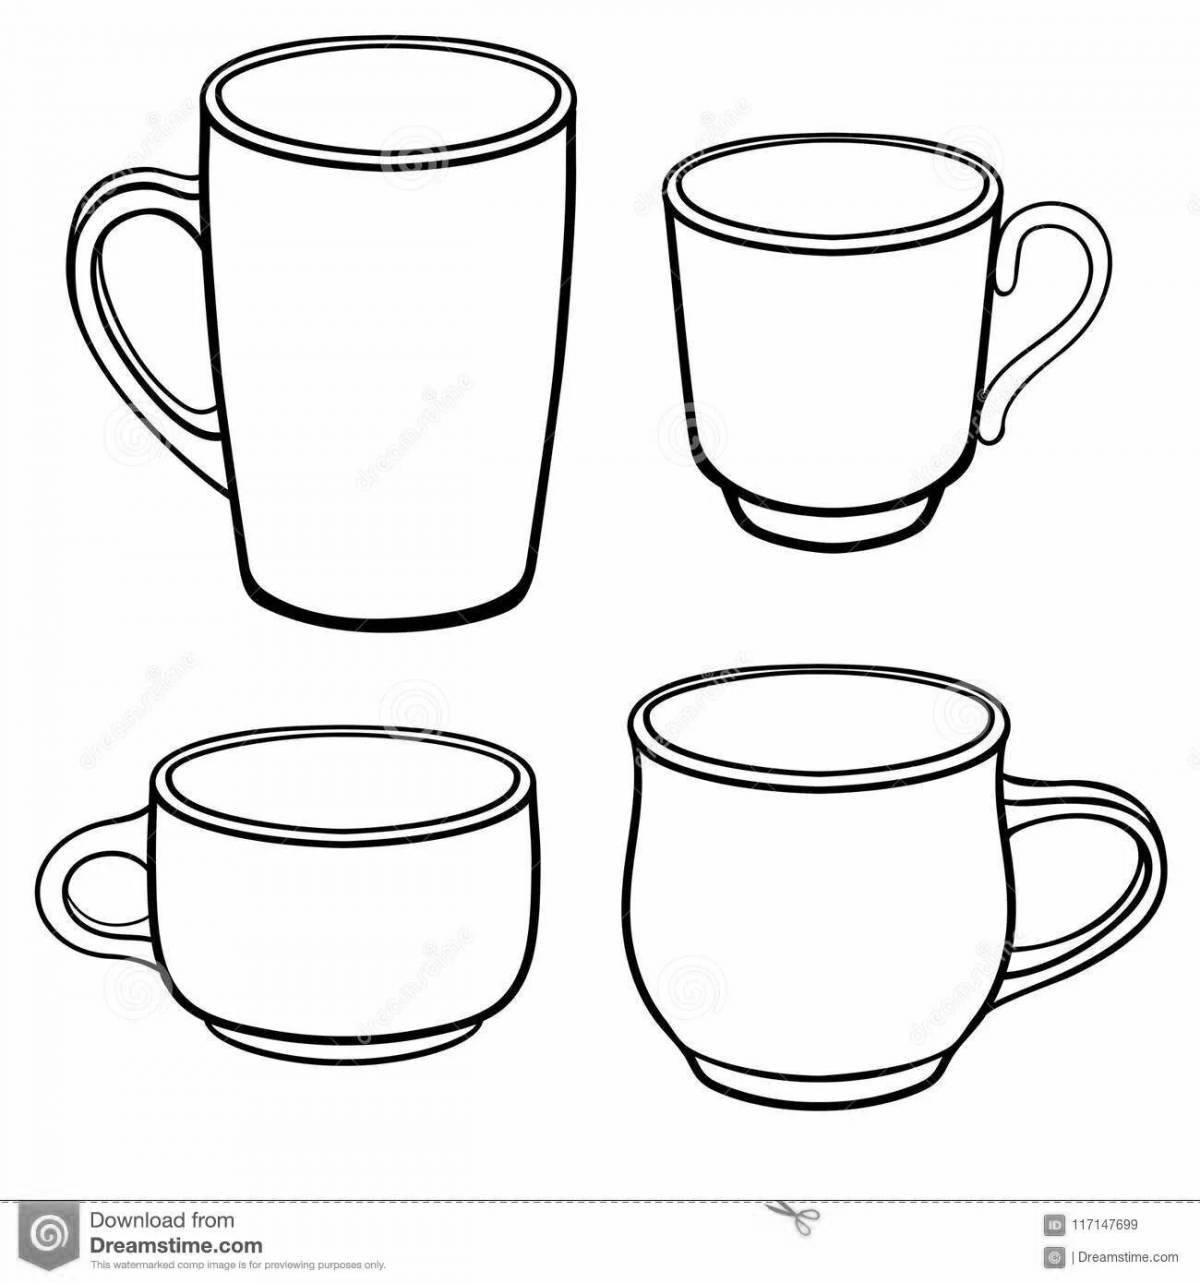 Intricate cup pattern coloring page